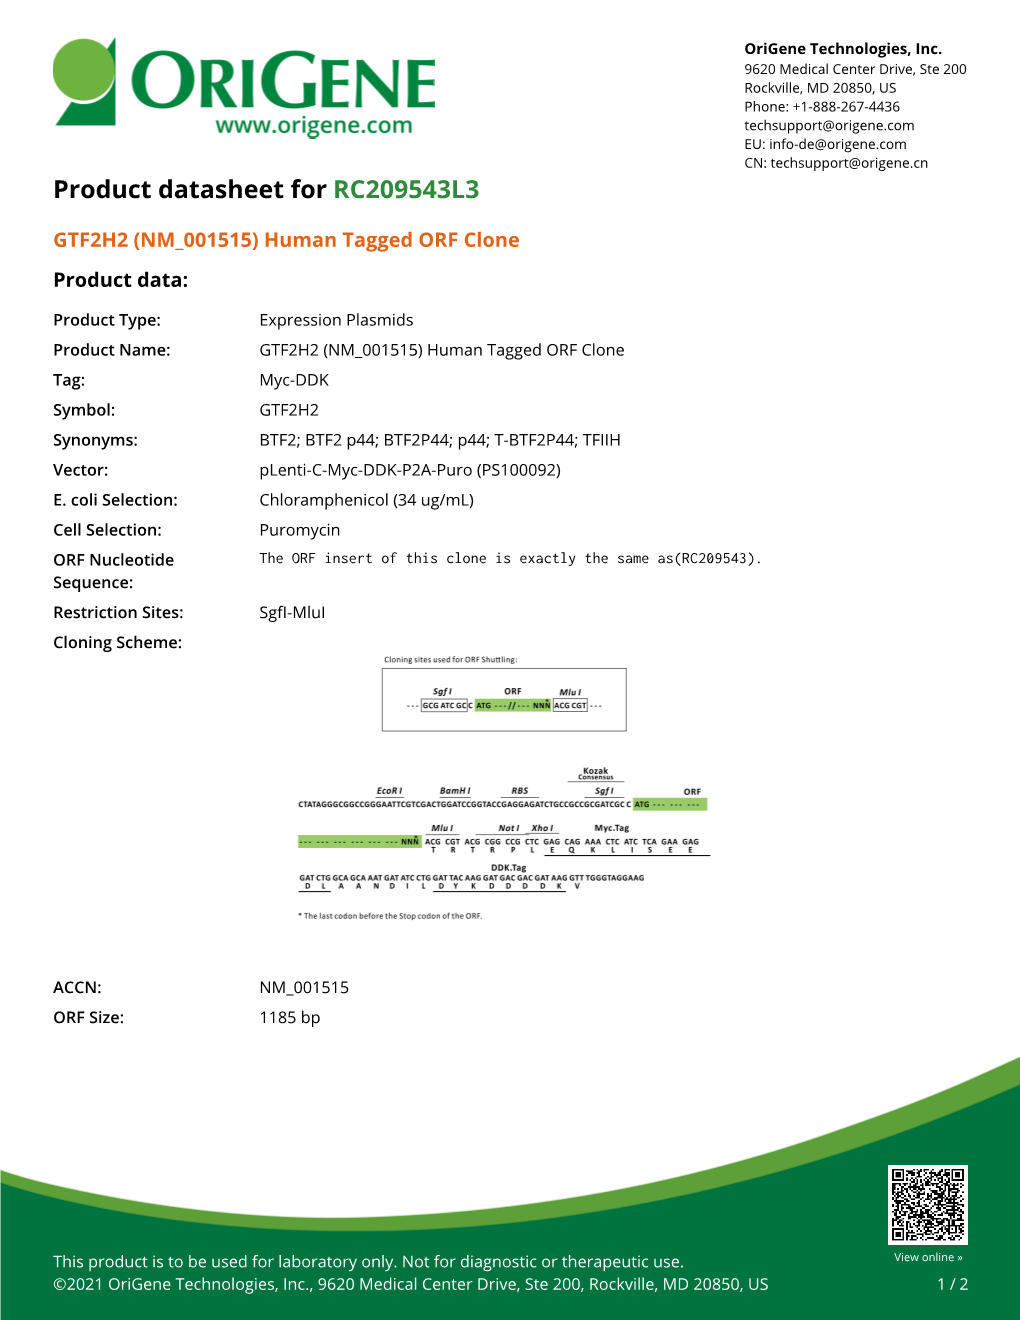 GTF2H2 (NM 001515) Human Tagged ORF Clone Product Data